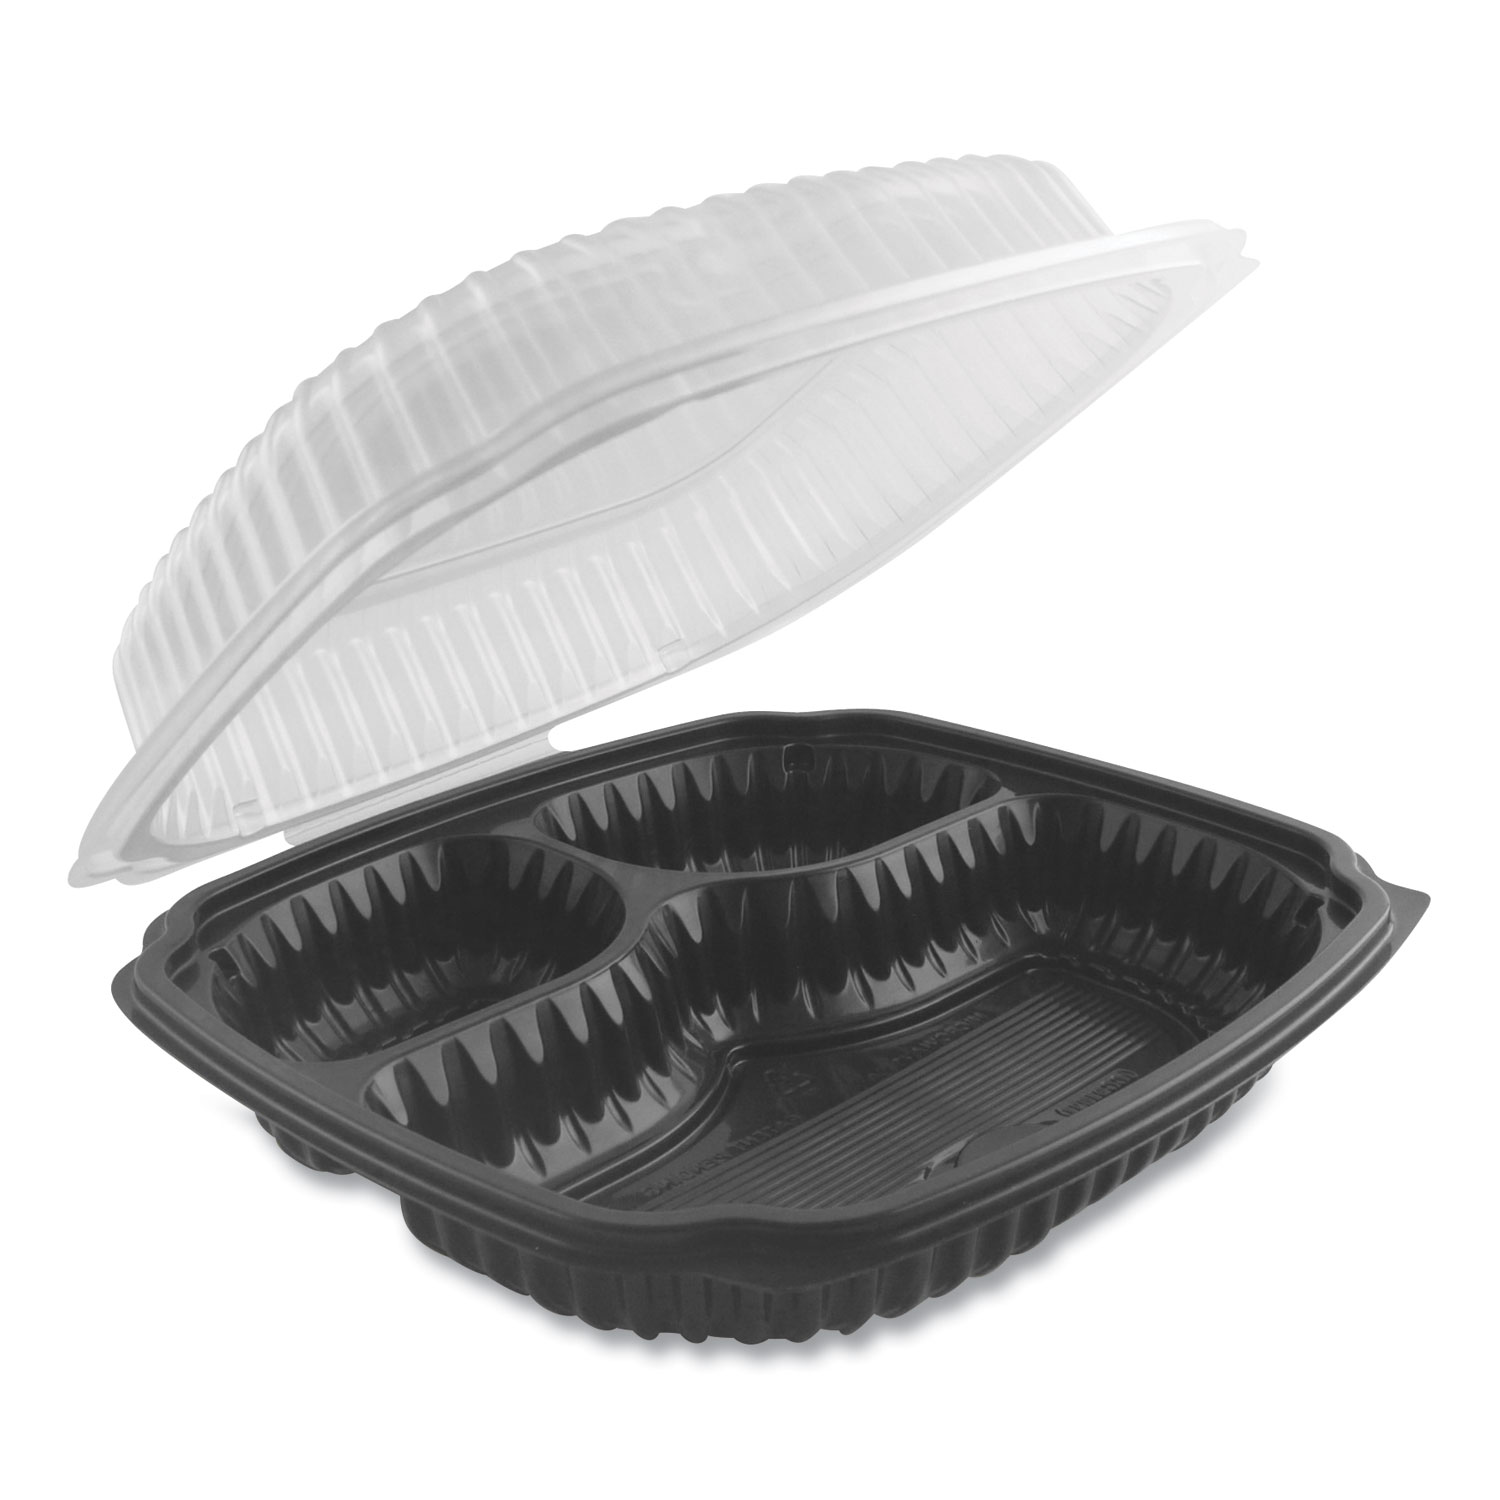  Anchor Packaging 4699631 Culinary Lites Microwavable 3-Compartment Container, 26 oz/7 oz/7 oz, 9 x 9 x 3.01, Clear/Black, 100/Carton (ANZ4699631) 